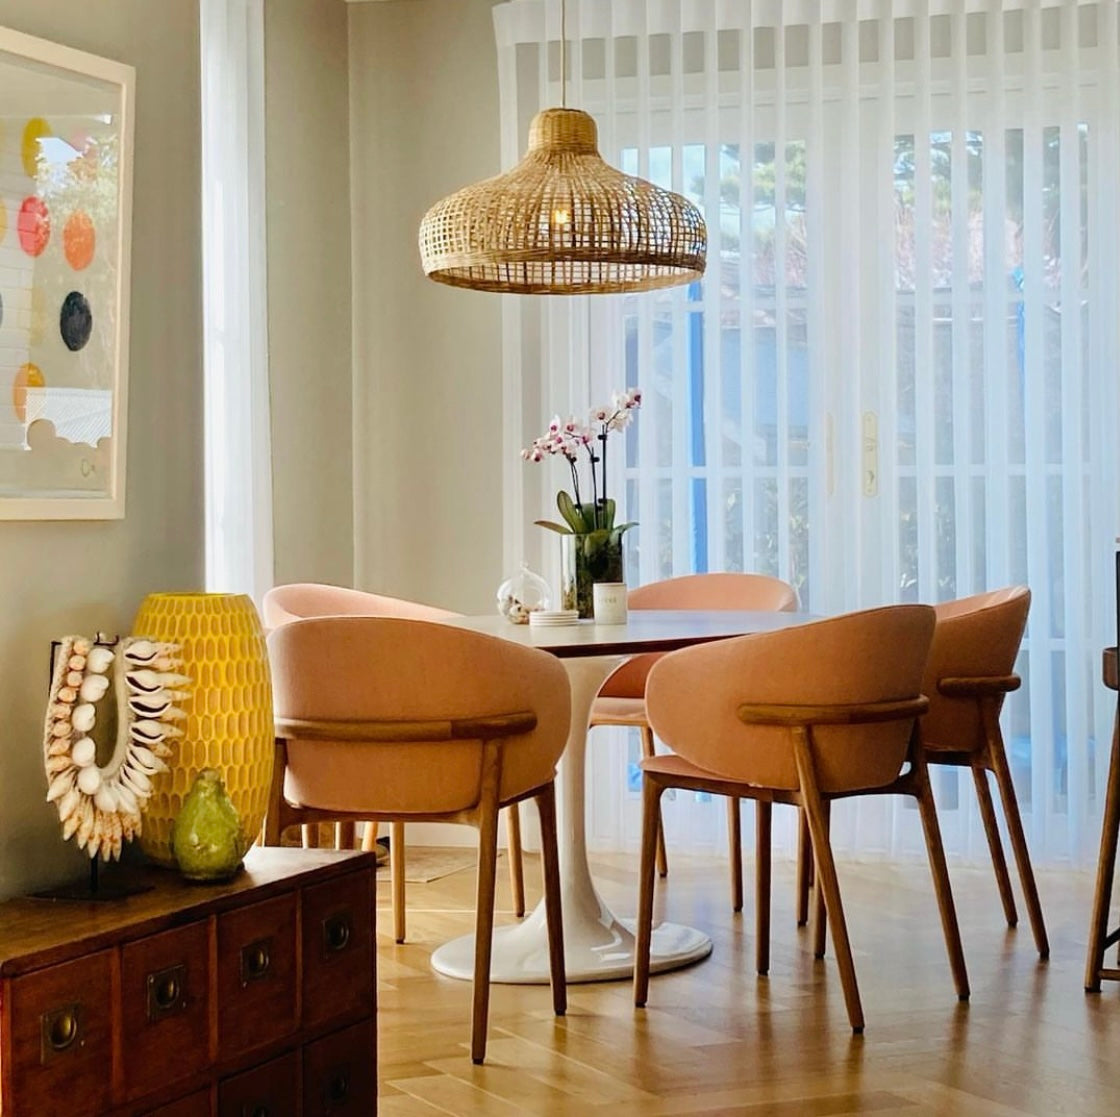 A single Portsea sustainable pendant light in a natural colour hangs above a circular modern dining table.